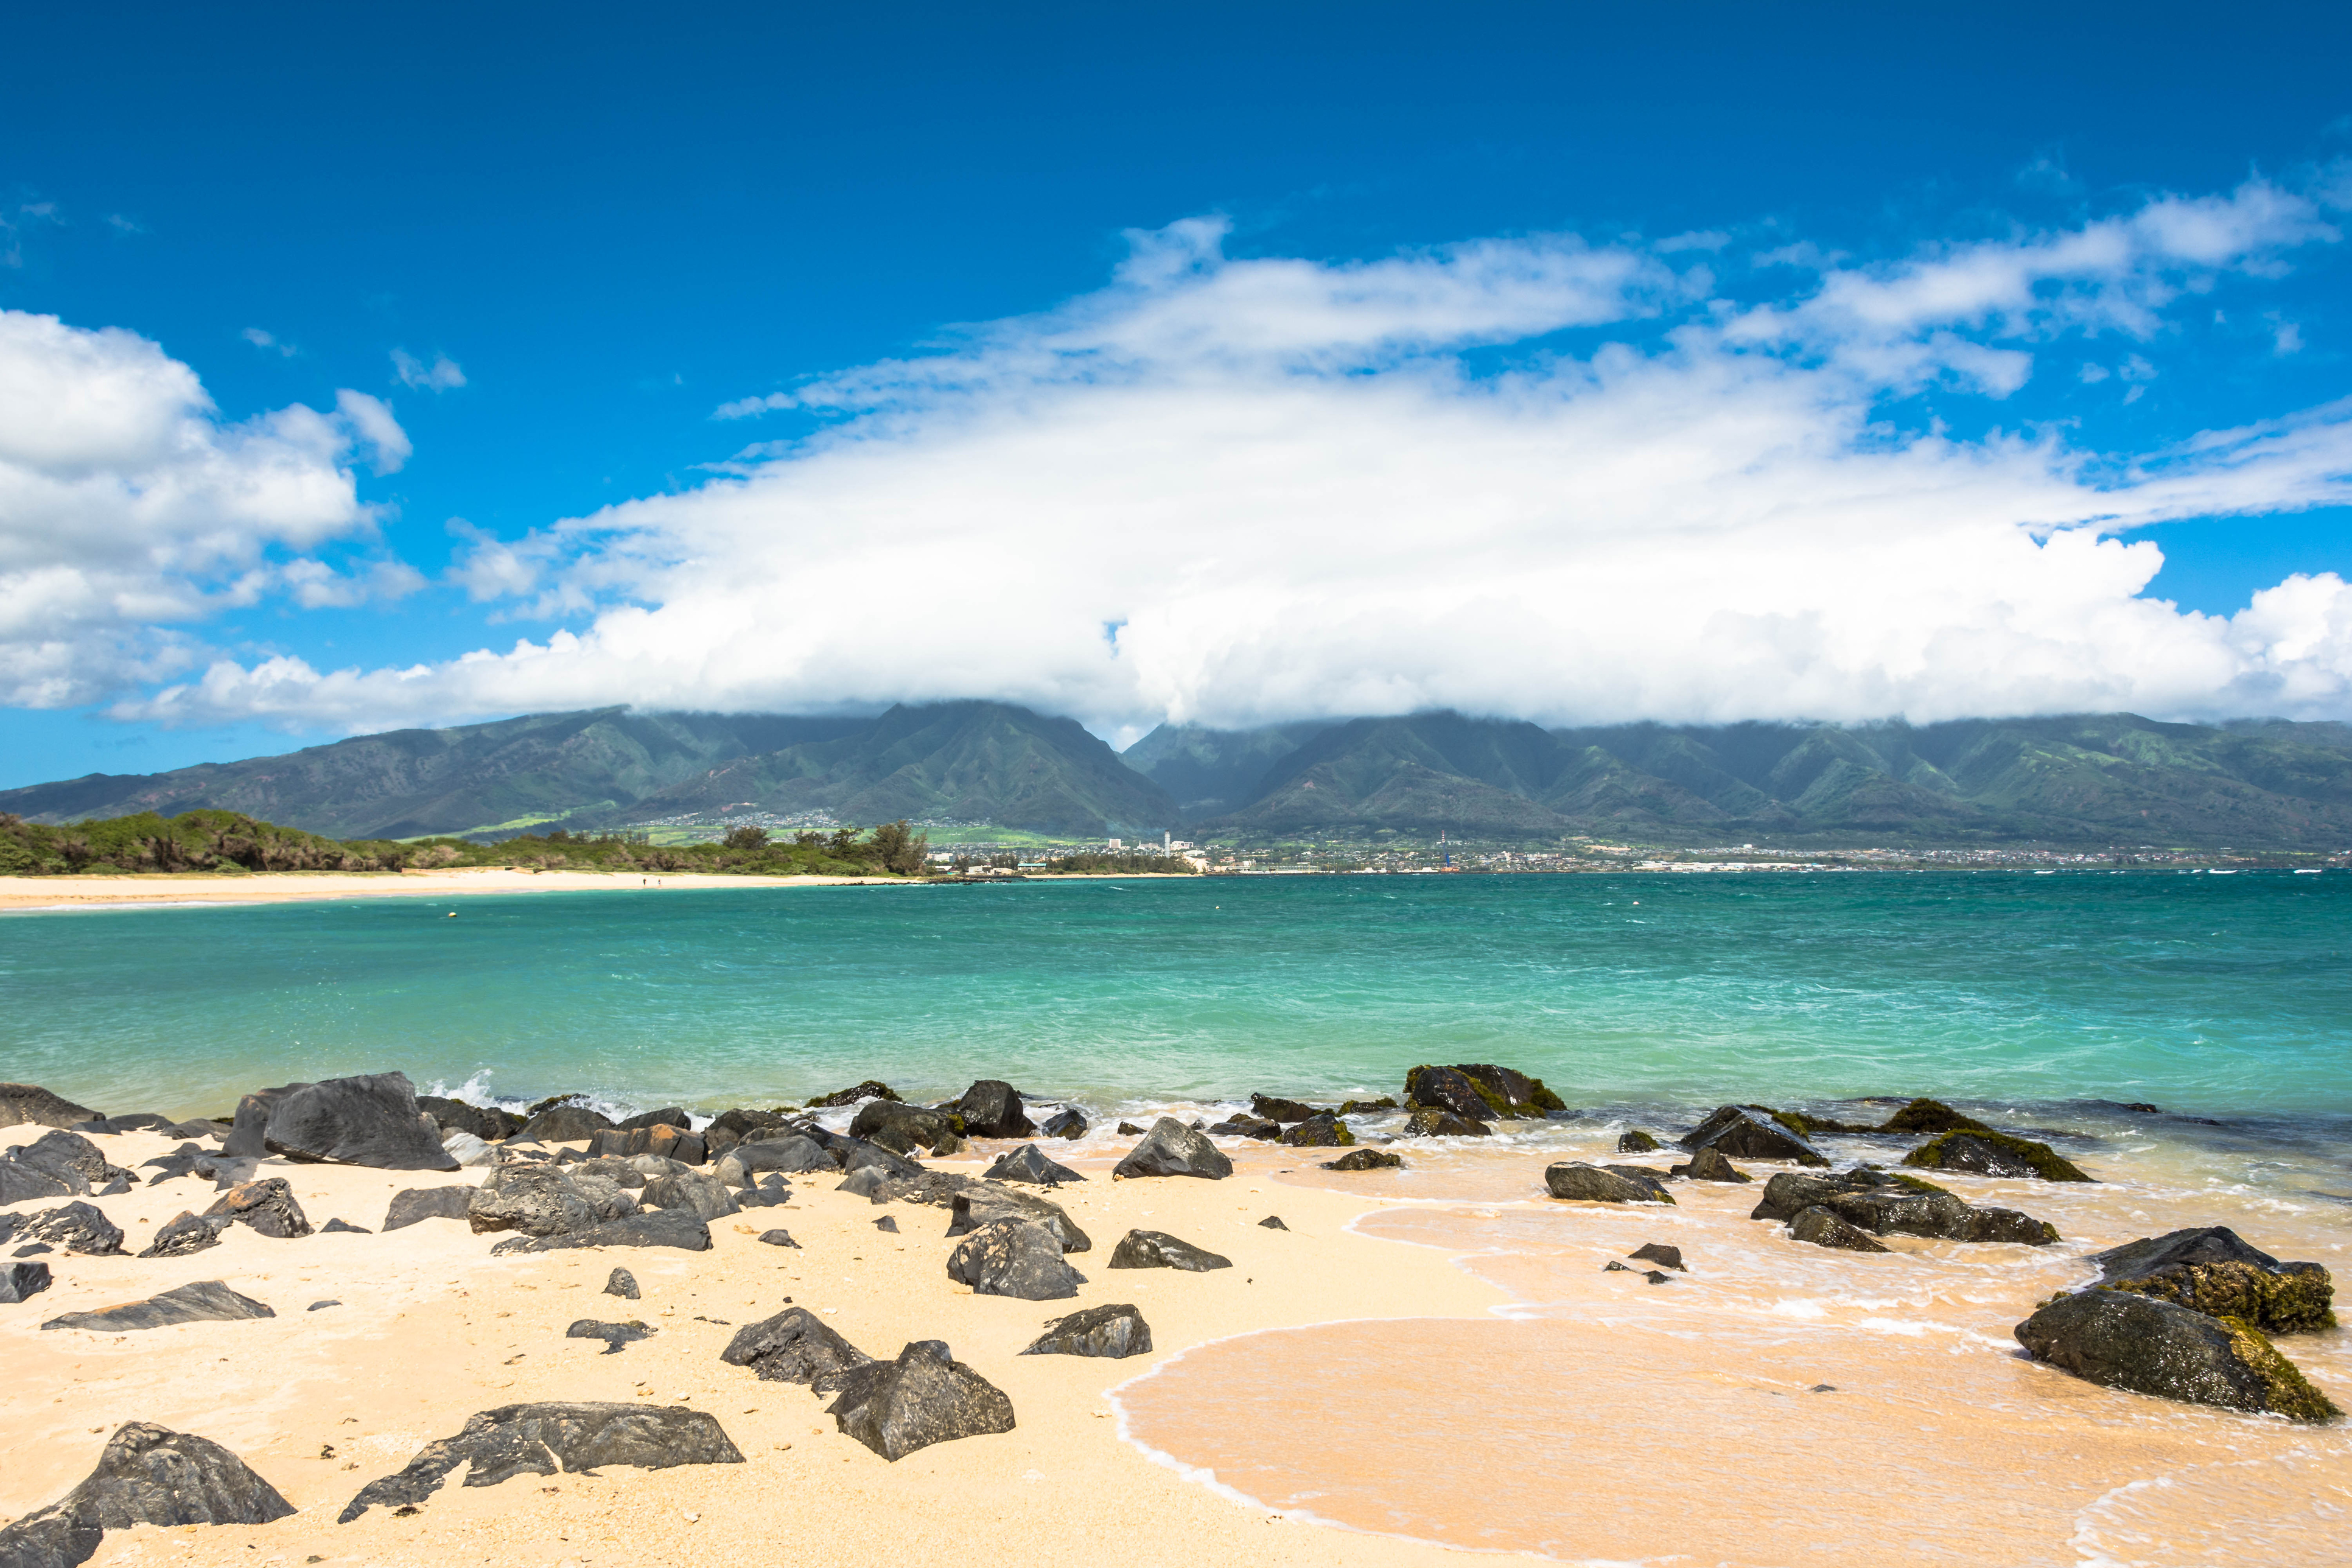 View of the sand beach of Kahului in Maui, Hawaii